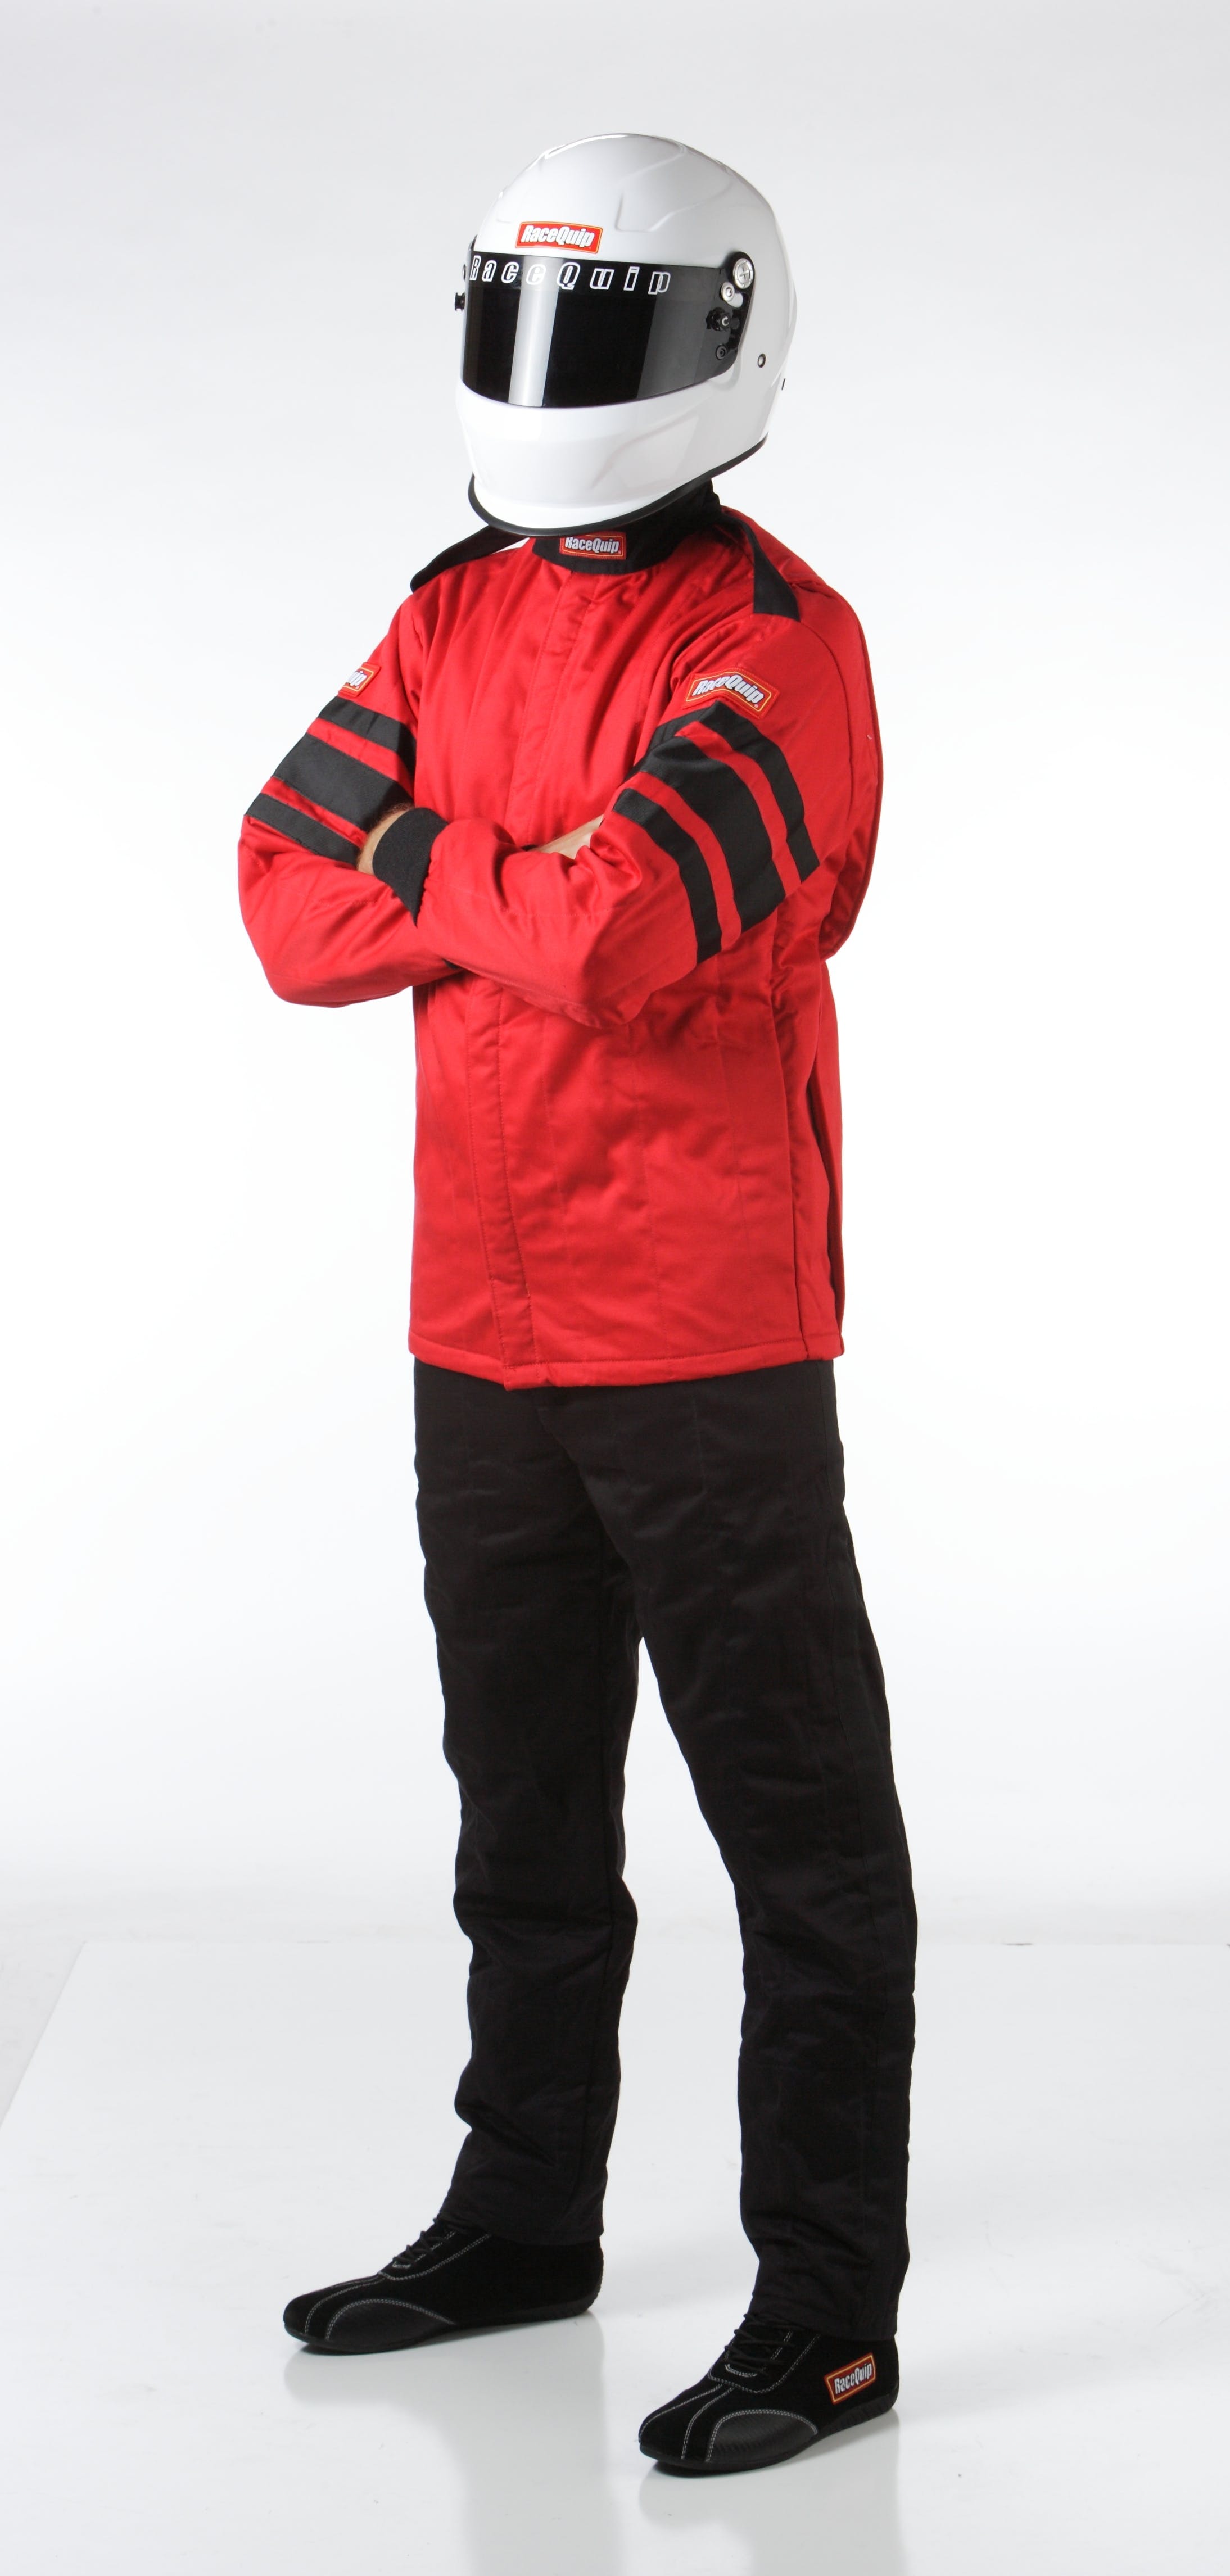 RaceQuip 121015 SFI-5 Pyrovatex Multi-Layer Racing Fire Jacket (Red, Large)